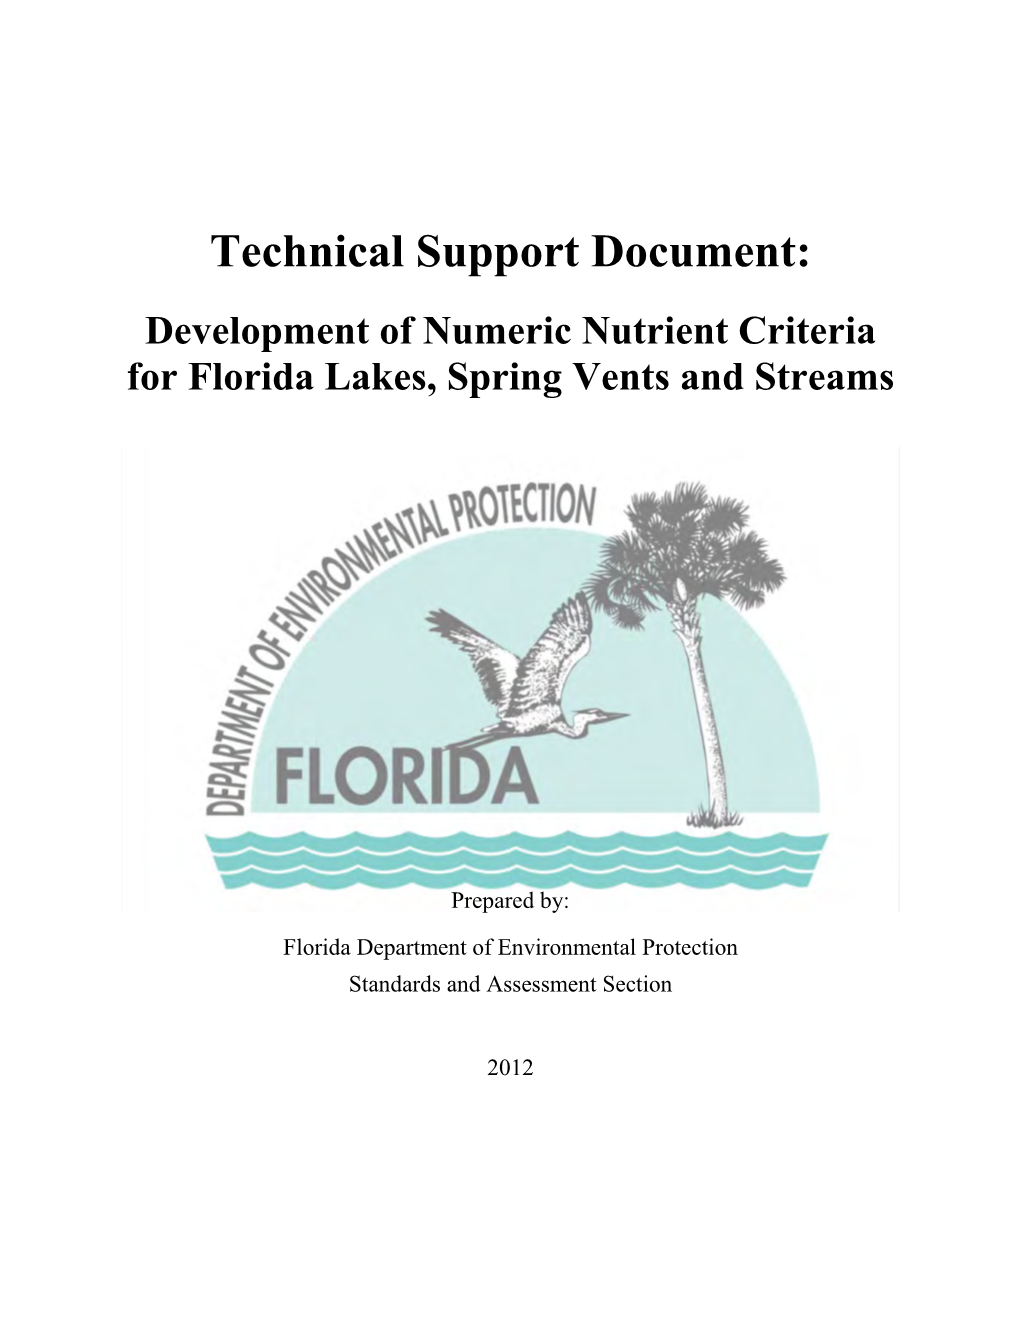 Technical Support Document: Development of Numeric Nutrient Criteria for Florida Lakes, Spring Vents and Streams